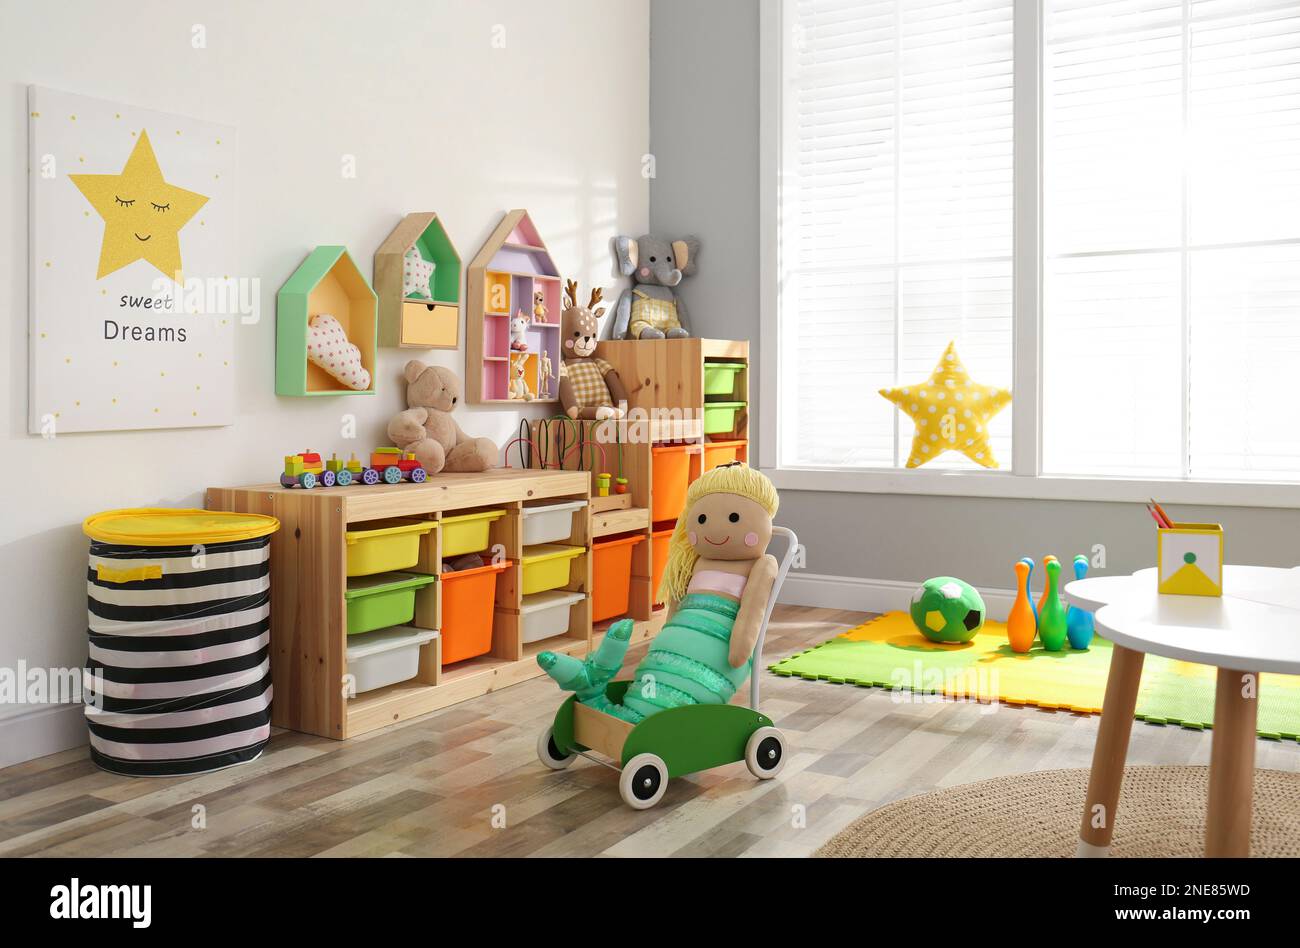 Stylish playroom interior with shelving unit and different soft toys Stock Photo